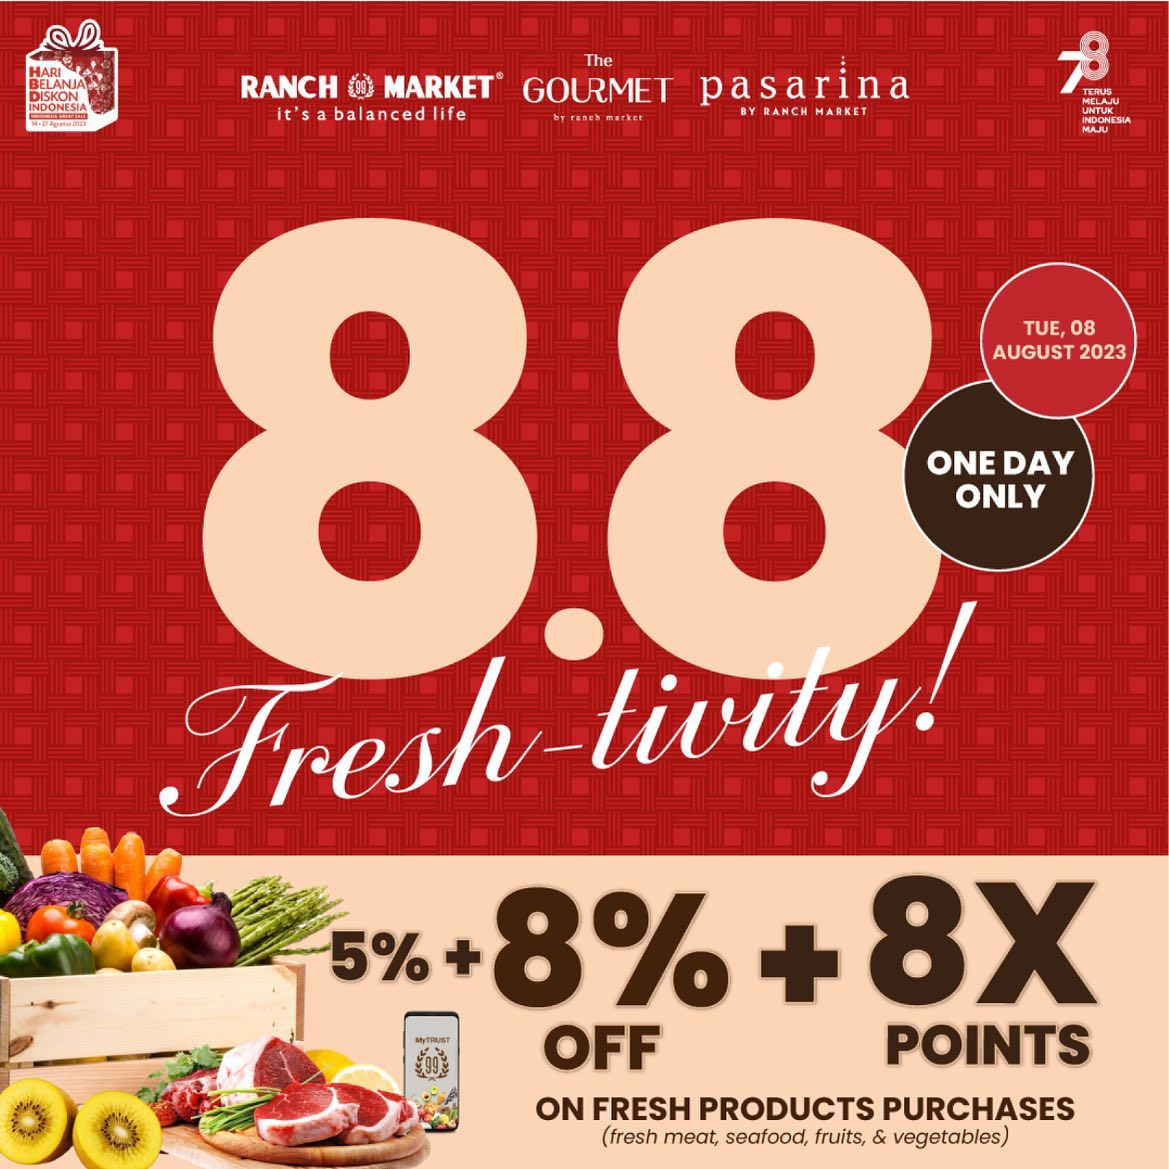 Promo RANCH MARKET Special 8.8! TODAY for ONE DAY ONLY!